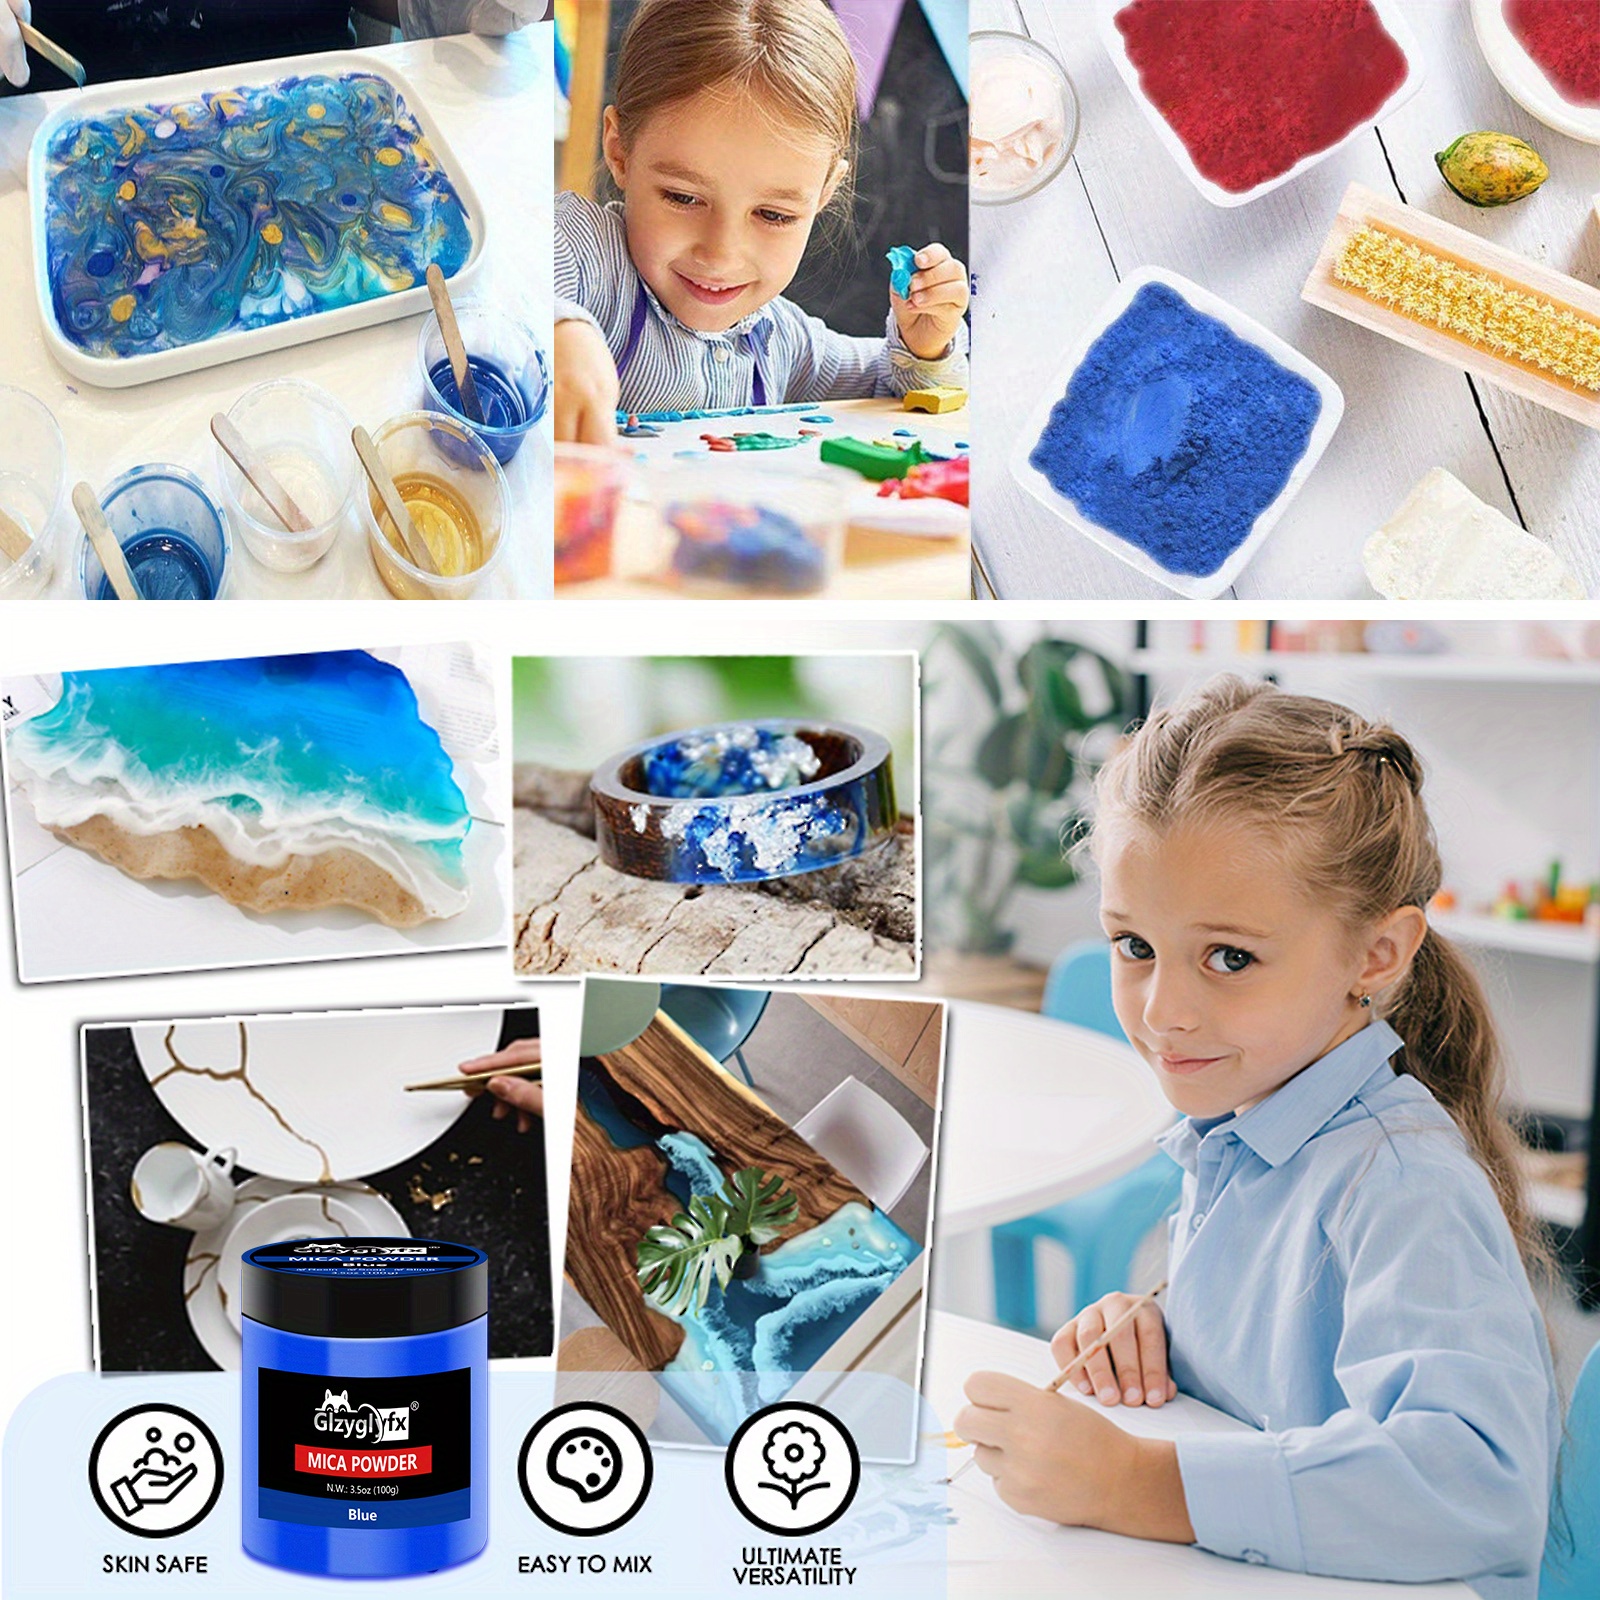 100g Jar Blue Pigment Powder Colorant , Epoxy Resin, DIY Crafting  Projects,Epoxy - Resin Art Supplies , Paint Making, Polymer Clay